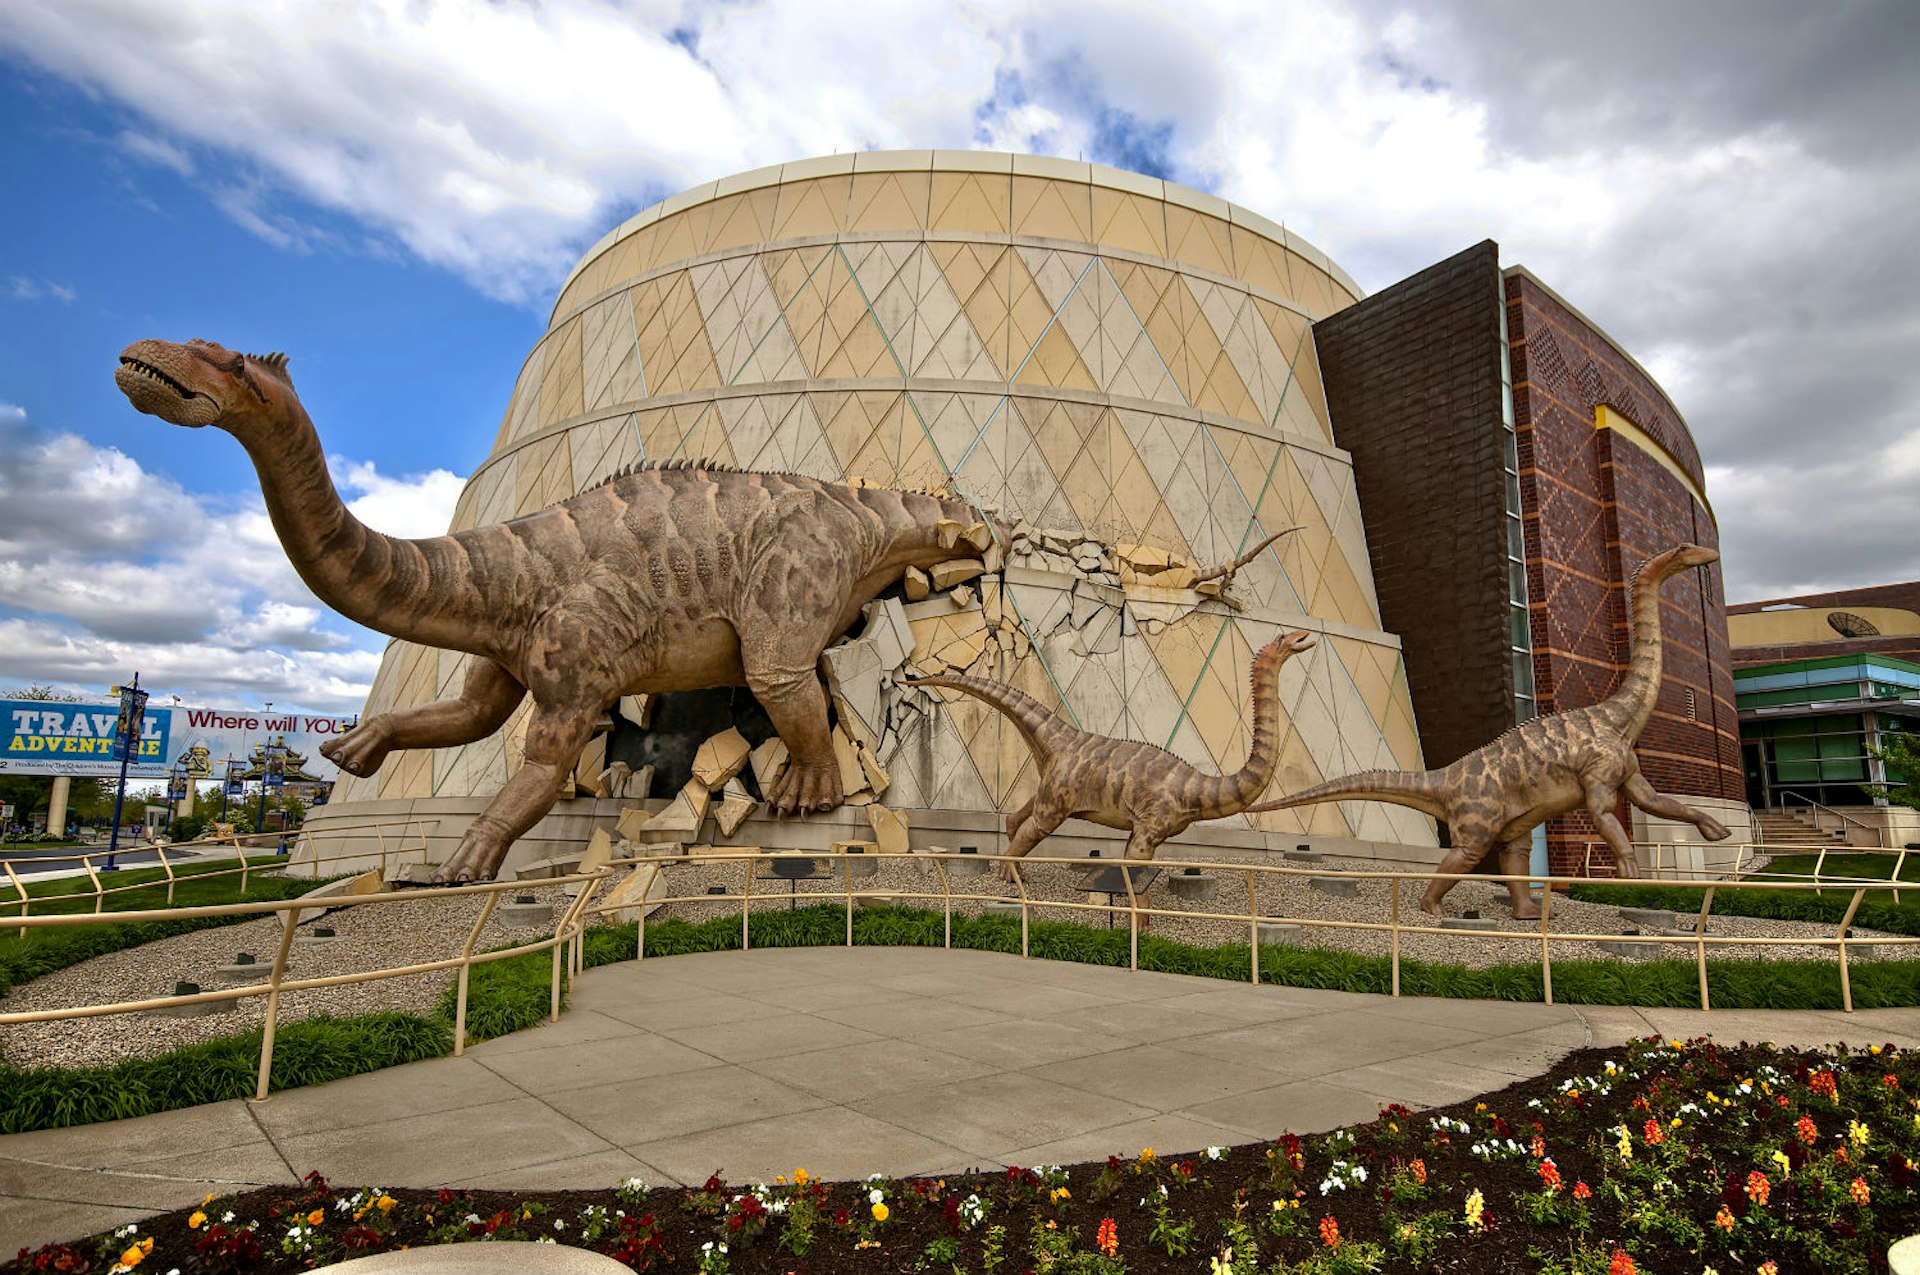 A dinosaur busts through the wall of the Children’s Museum of Indianapolis. Image by Lavengood Photography.